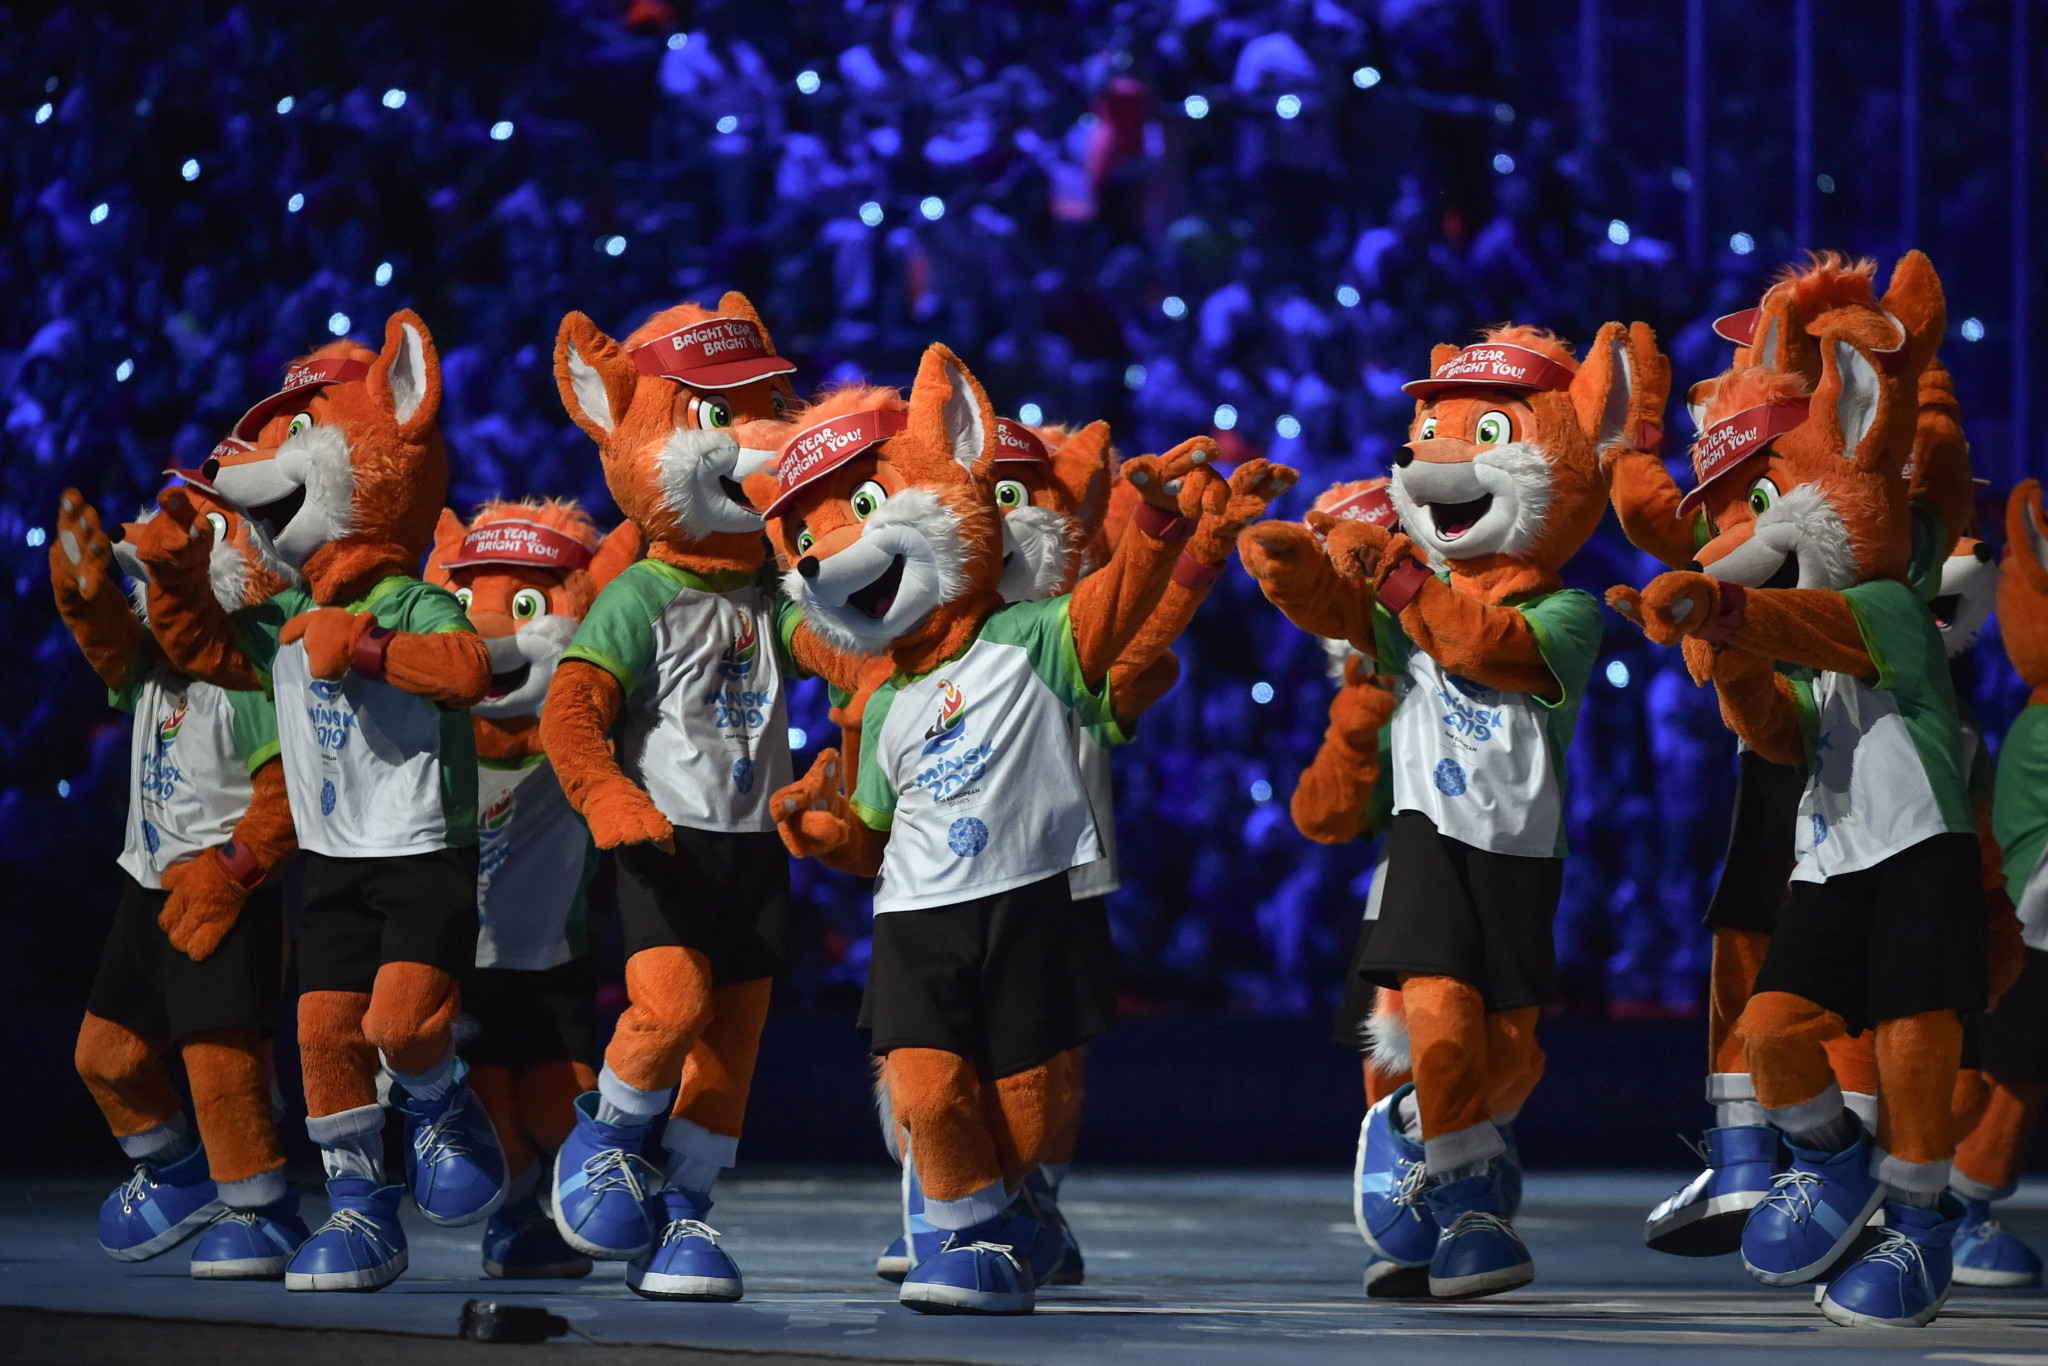 Spectators said goodbye to the Minsk 2019 mascot, Lesik the Fox ©Getty Images